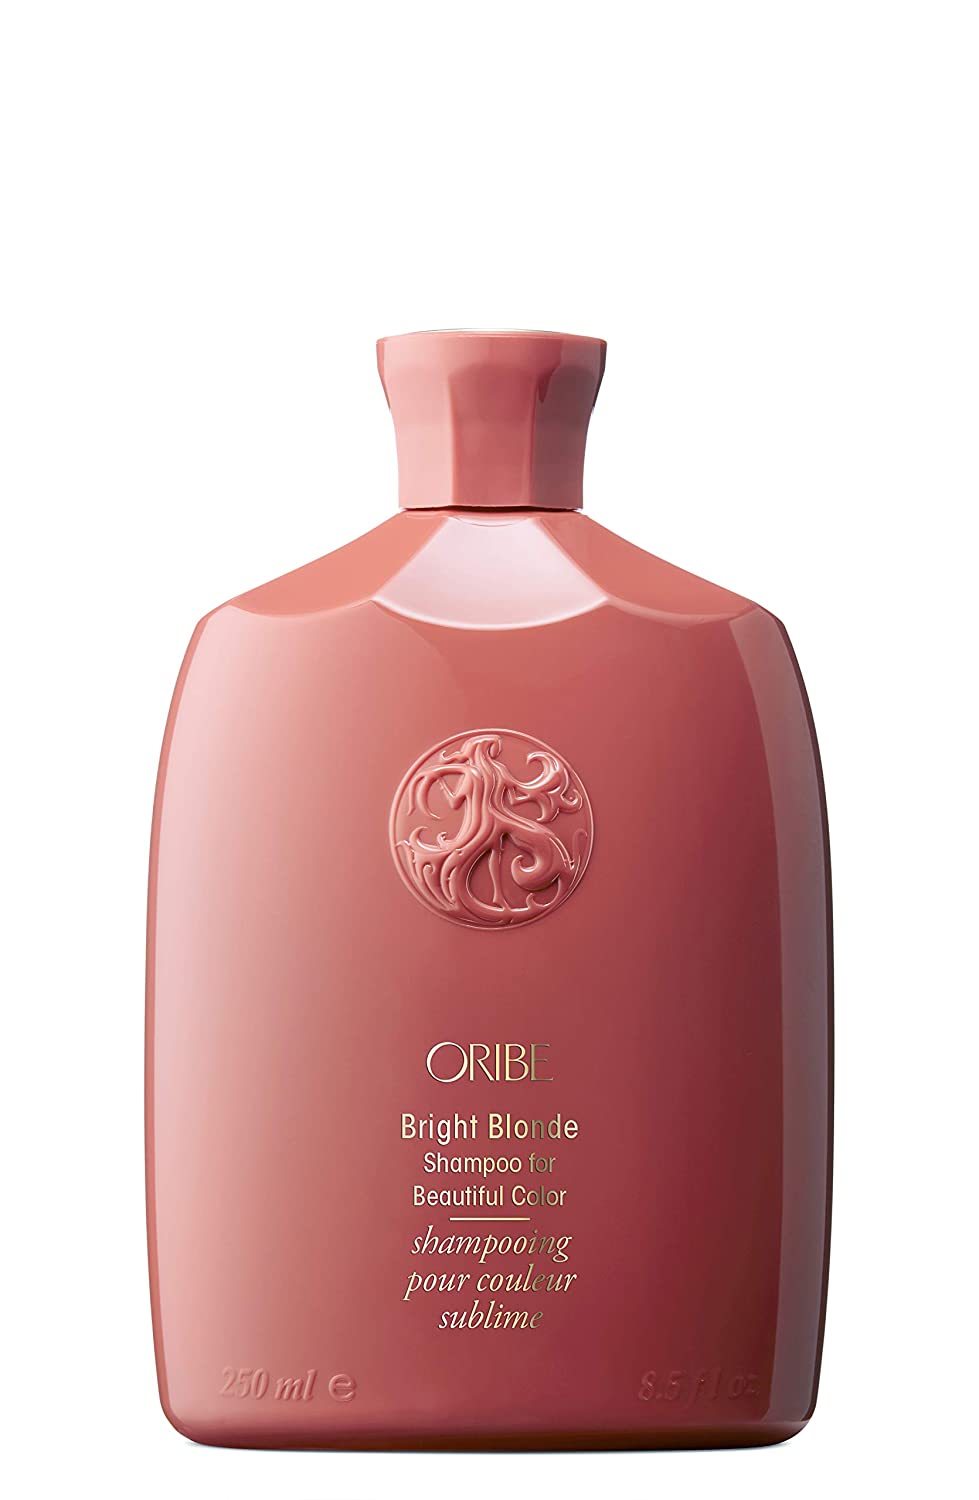  1. Overall winner: Oribe Bright Blonde Shampoo for Beautiful Color. 